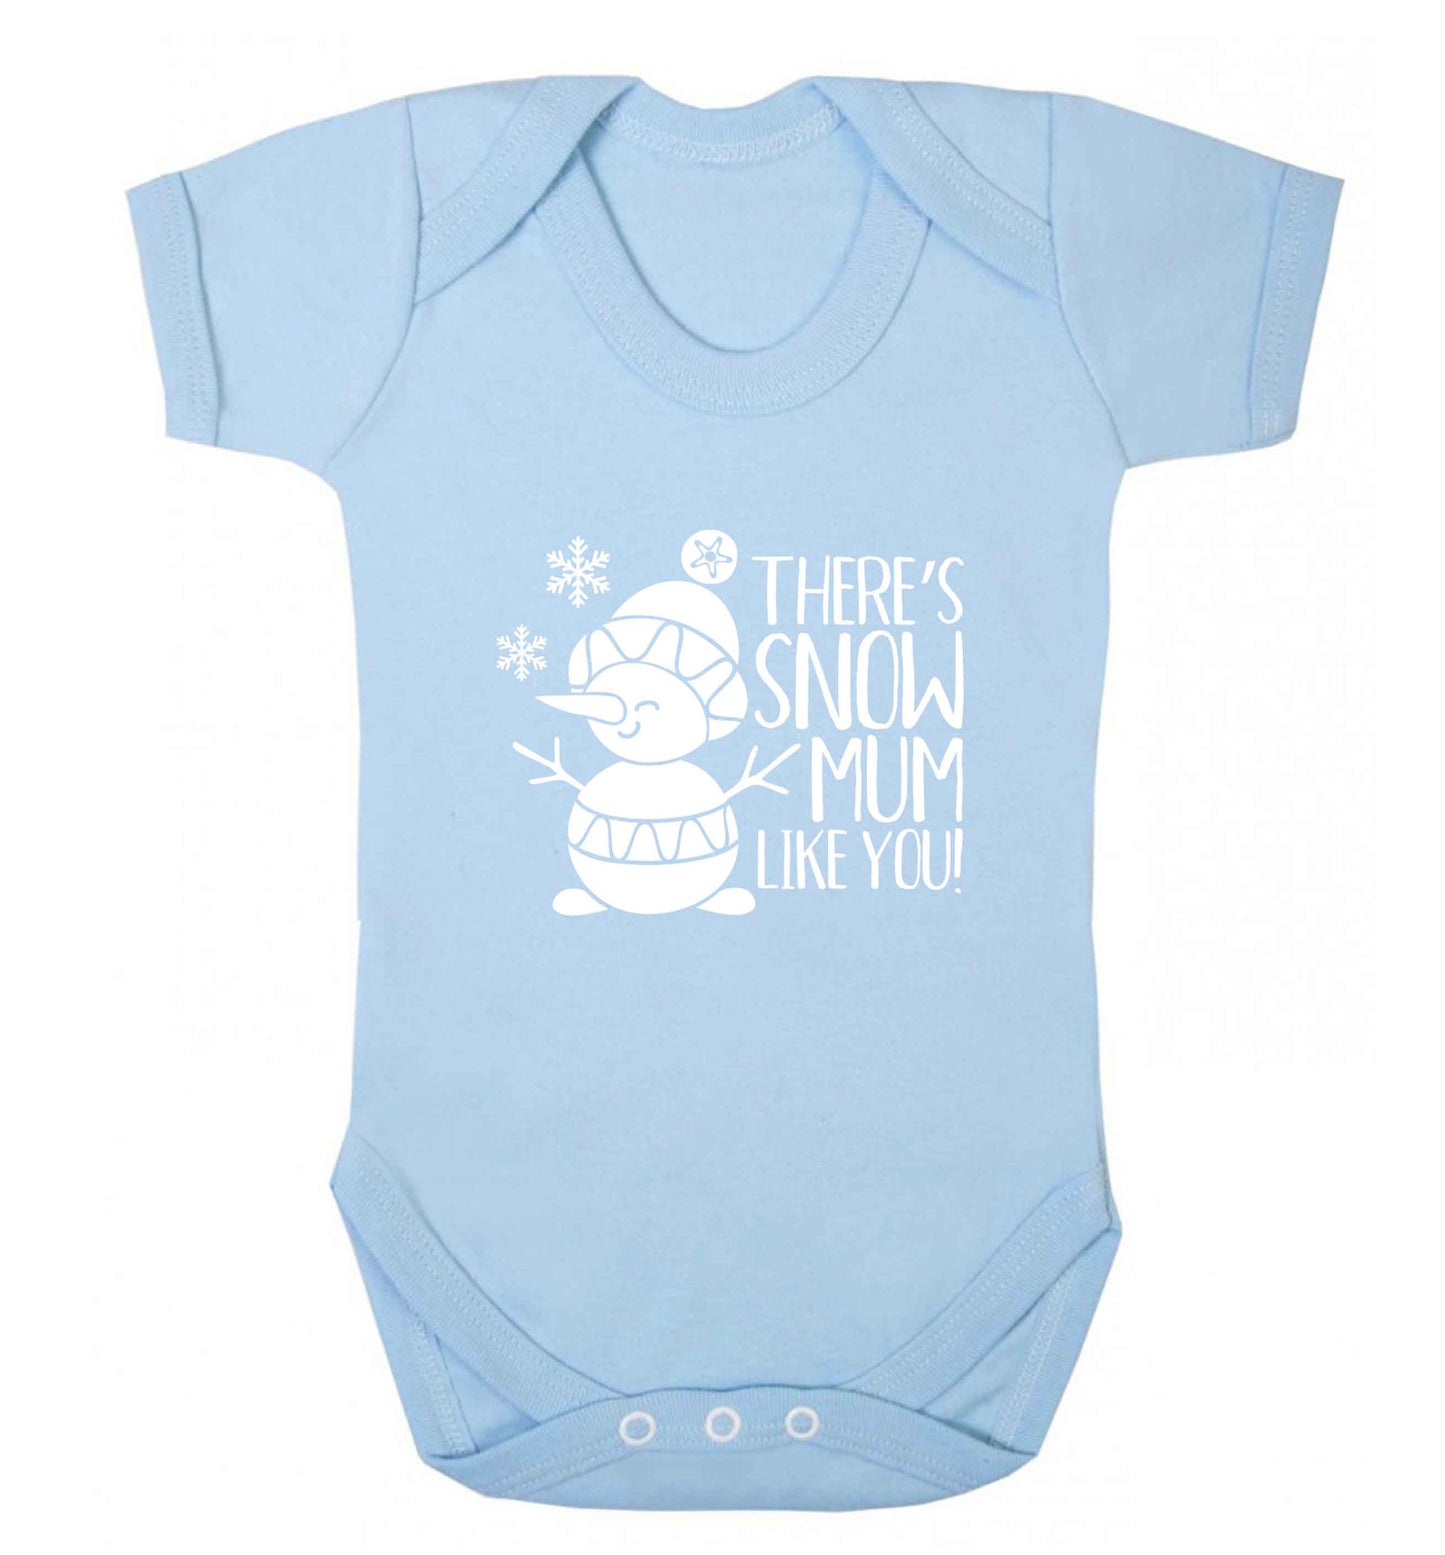 There's snow mum like you baby vest pale blue 18-24 months